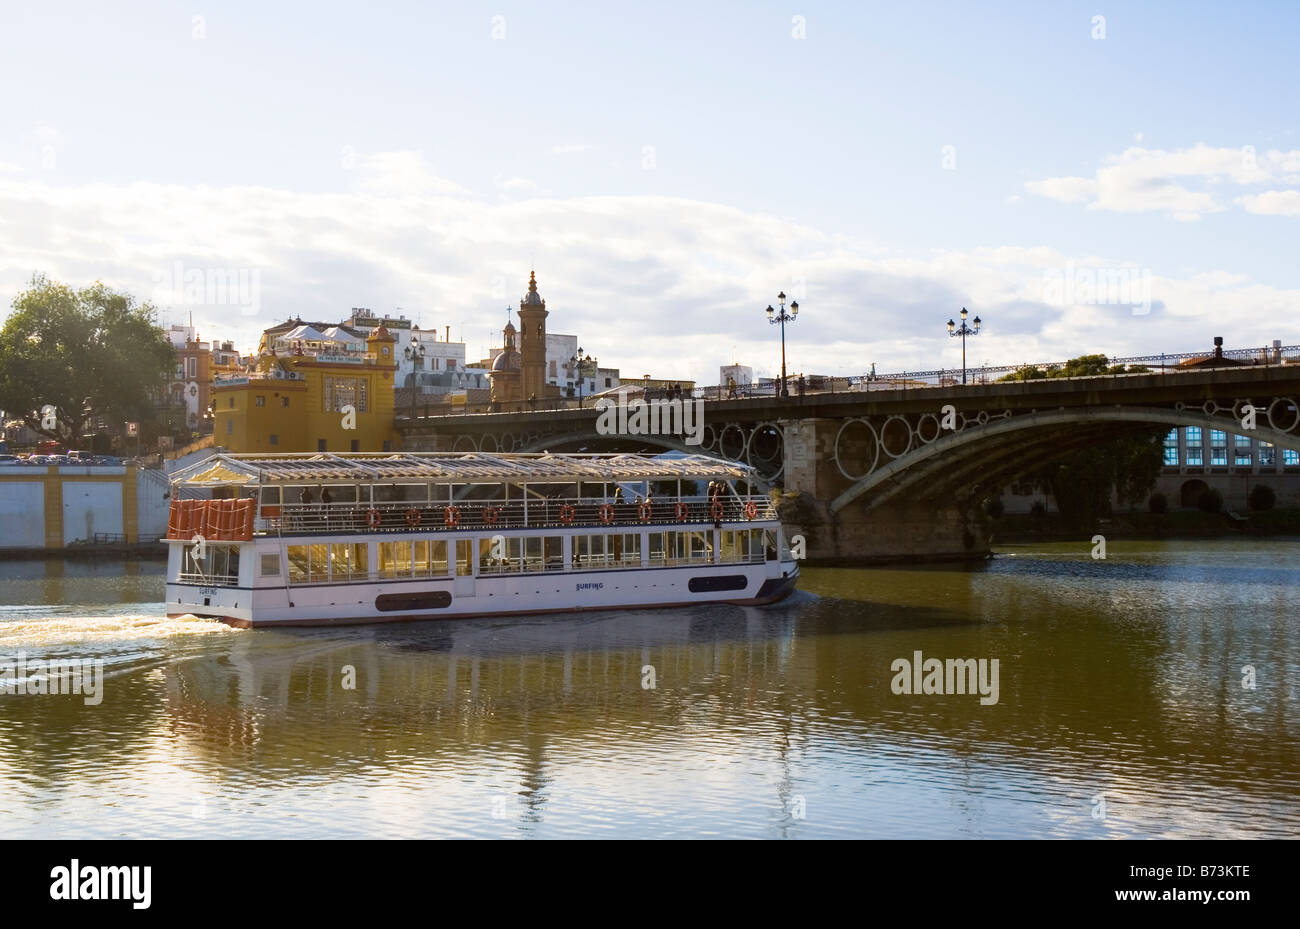 Seville Spain Excursion boat sailing under the Puente de Triana or Puente de Isabell II on the river Guadalquivir Stock Photo